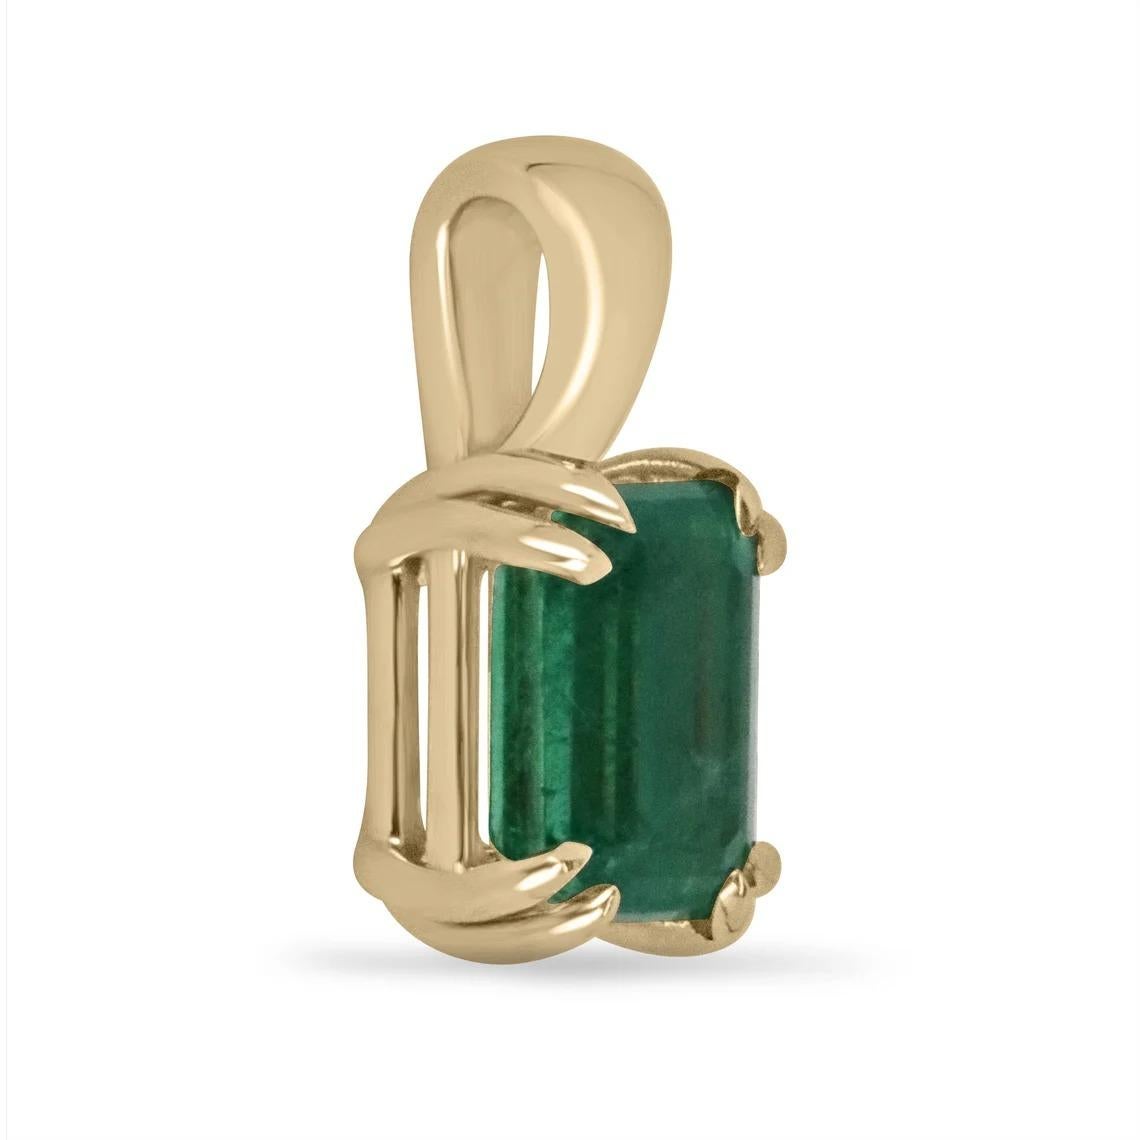 Featured is an absolutely stunning, and one-of-a-kind natural emerald pendant. The gemstone is a natural, 2.22-carat, Zambian emerald cut emerald with ravishing characteristics such as its luminous vivid green color, excellent transparency, luster,